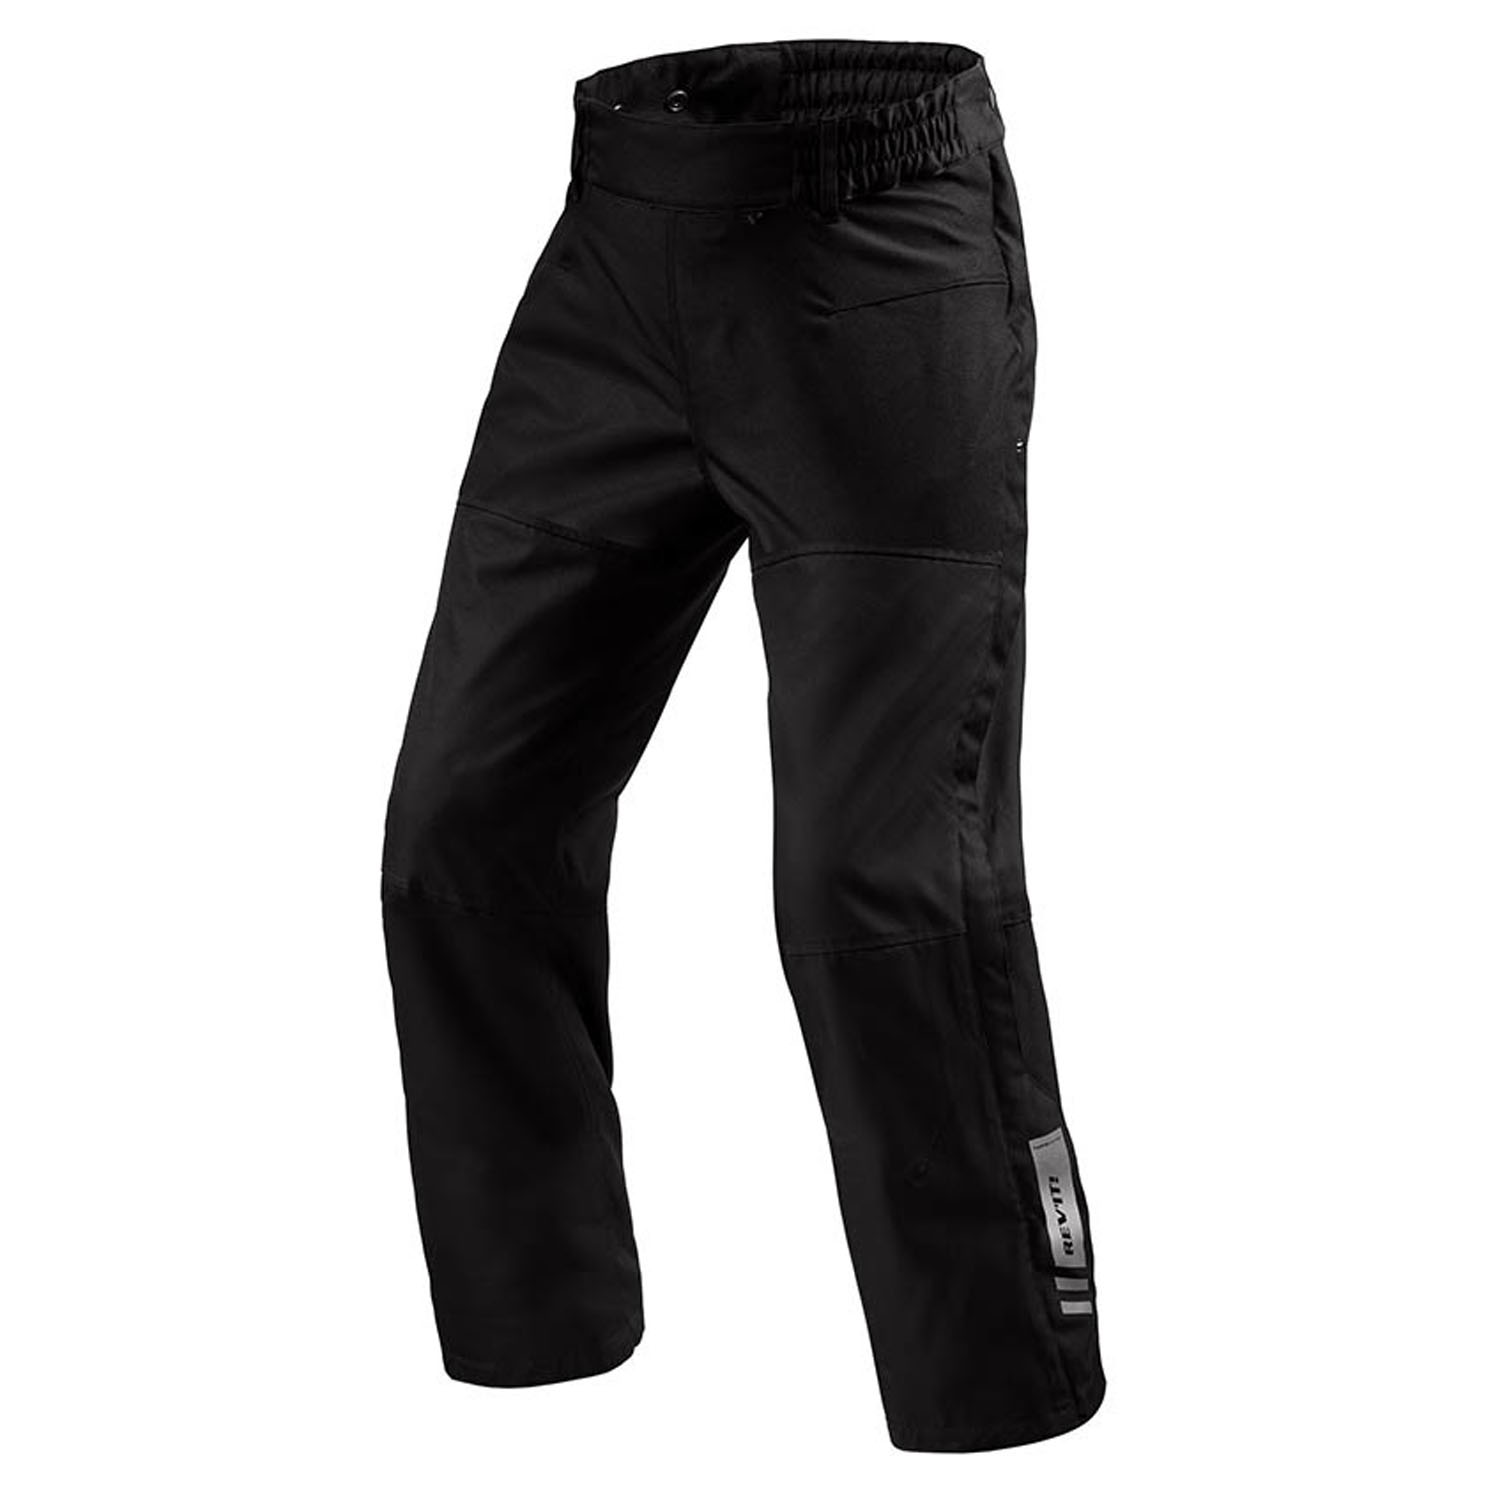 Image of EU REV'IT! Pants Axis 2 H2O Black Short Motorcycle Pants Taille 3XL